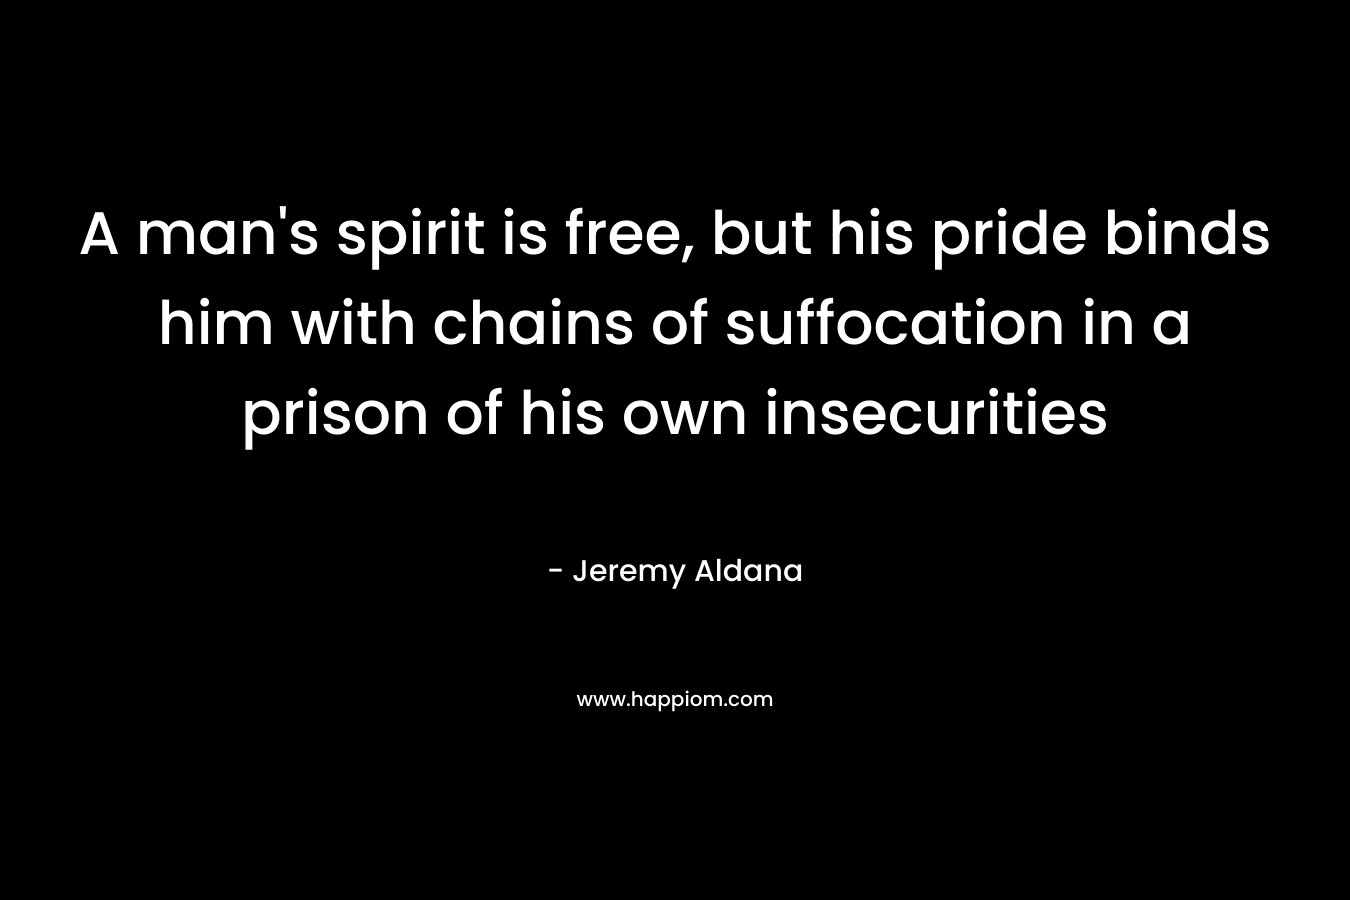 A man’s spirit is free, but his pride binds him with chains of suffocation in a prison of his own insecurities – Jeremy Aldana